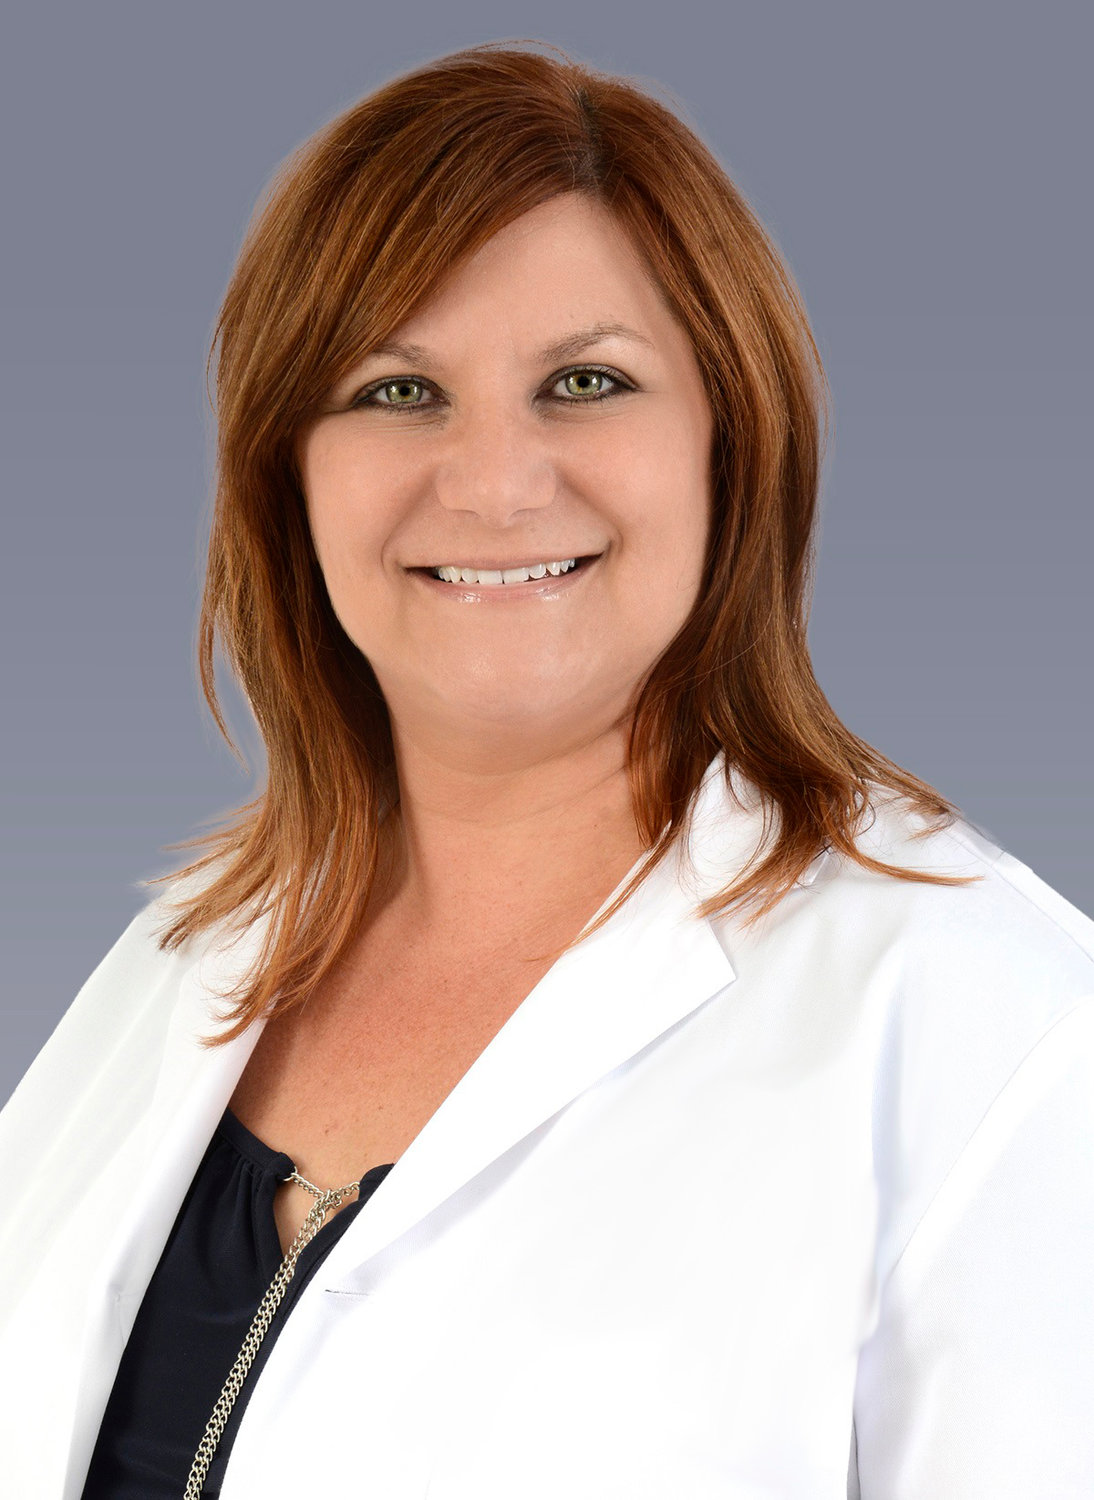 Jean Murray is the system director of infection prevention and control at Luminis Health.